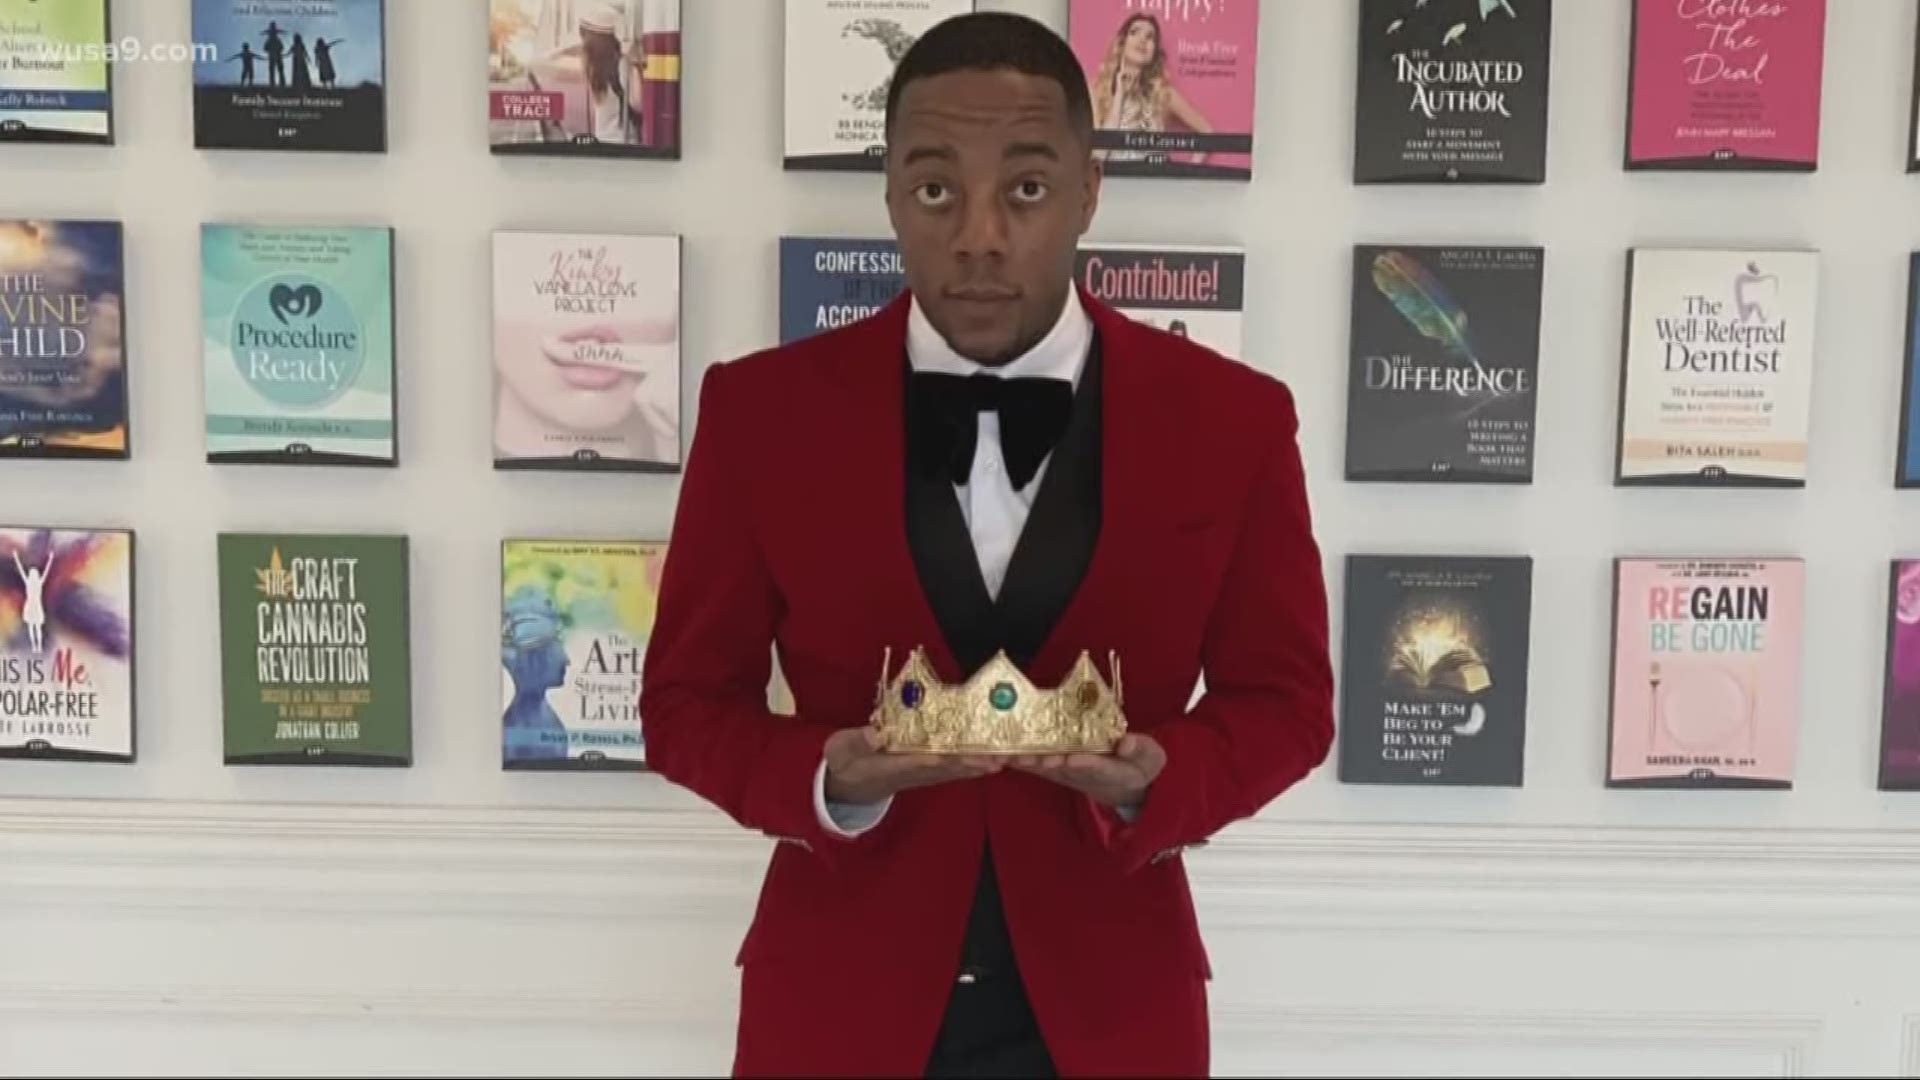 Amari Ice, who is also known as The Prince of Hearts, has dedicated his life and career to helping gay black men find lasting love.